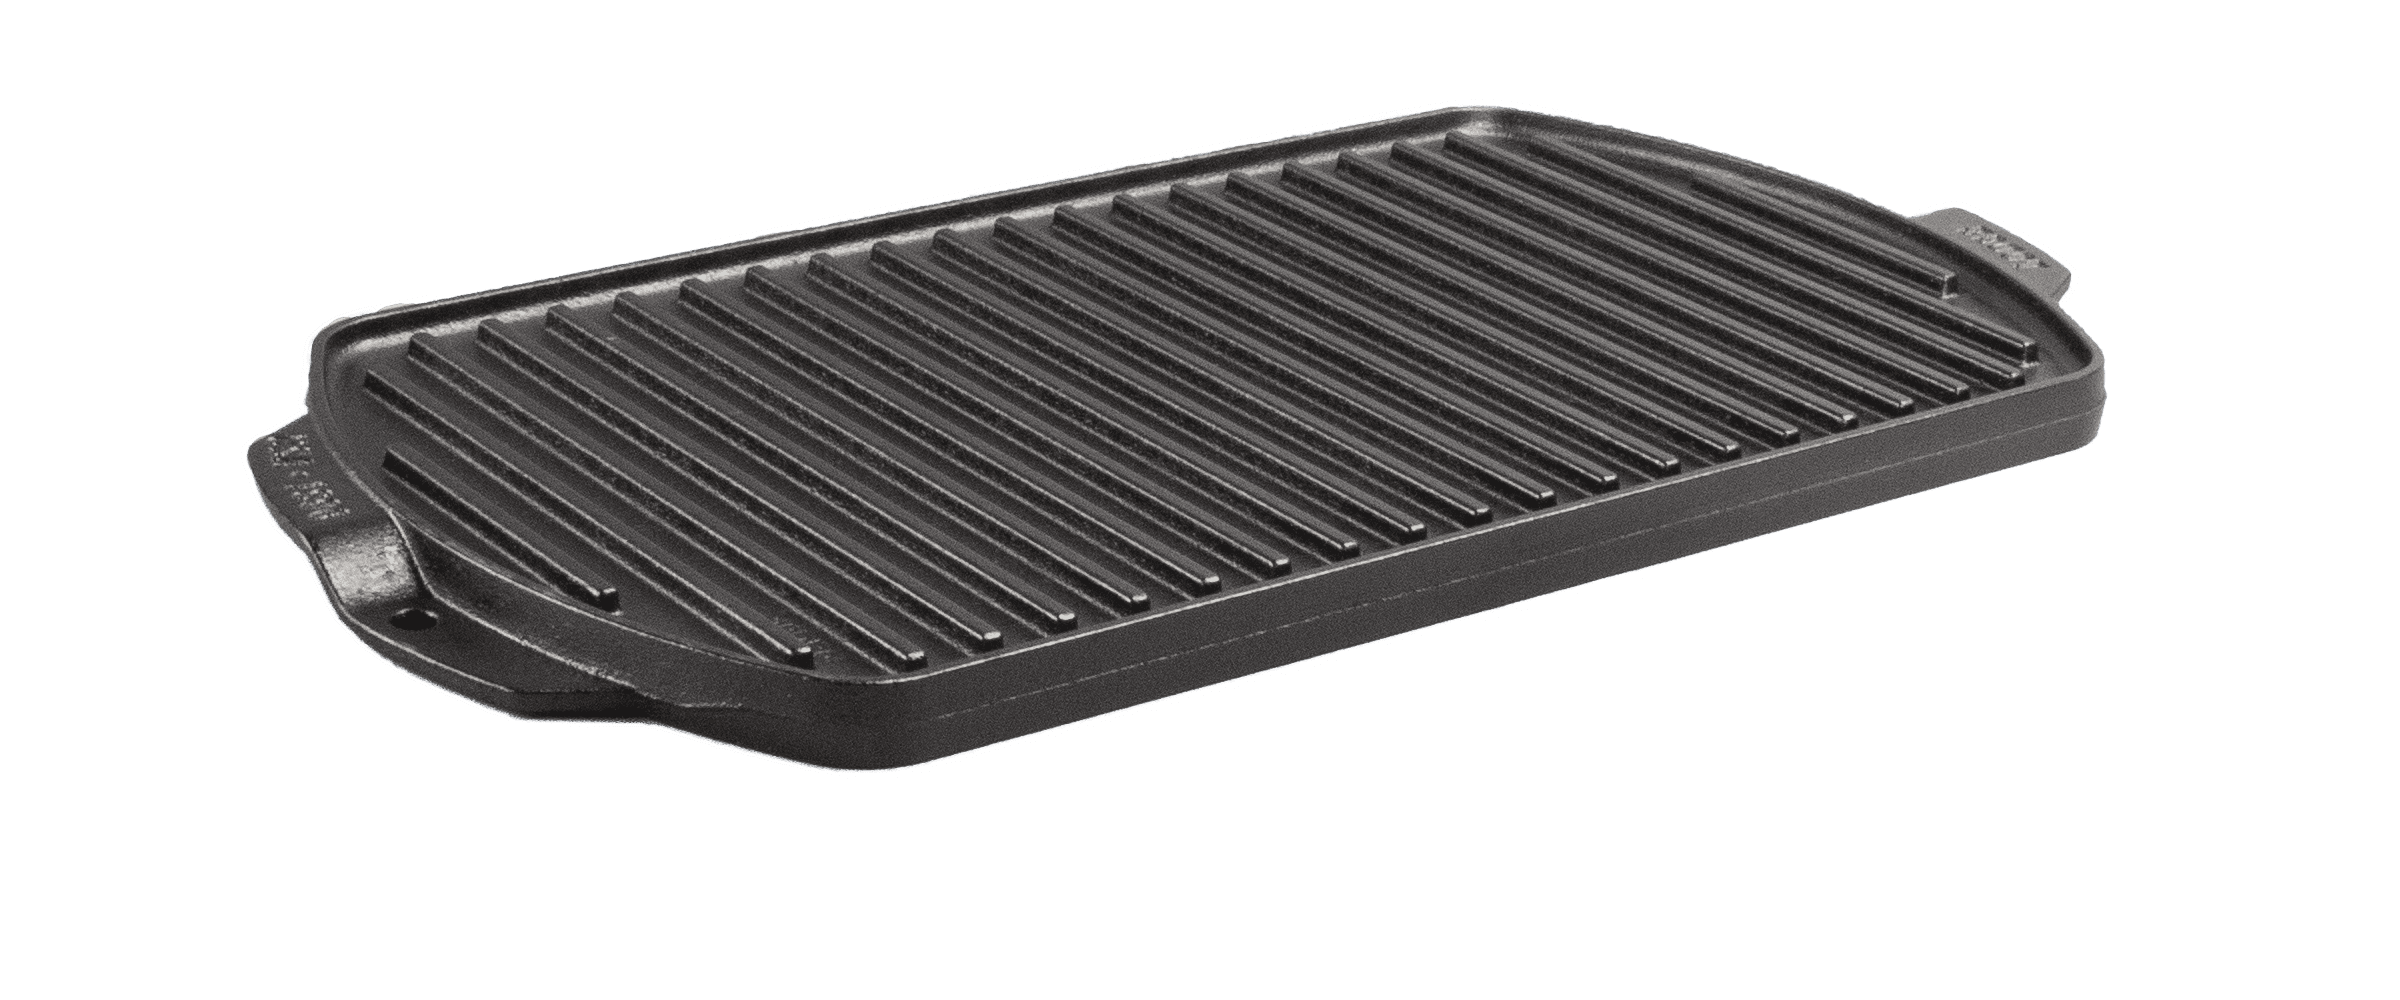 Custom Lodge® 10.5 Cast Iron Reversible Grill / Griddle